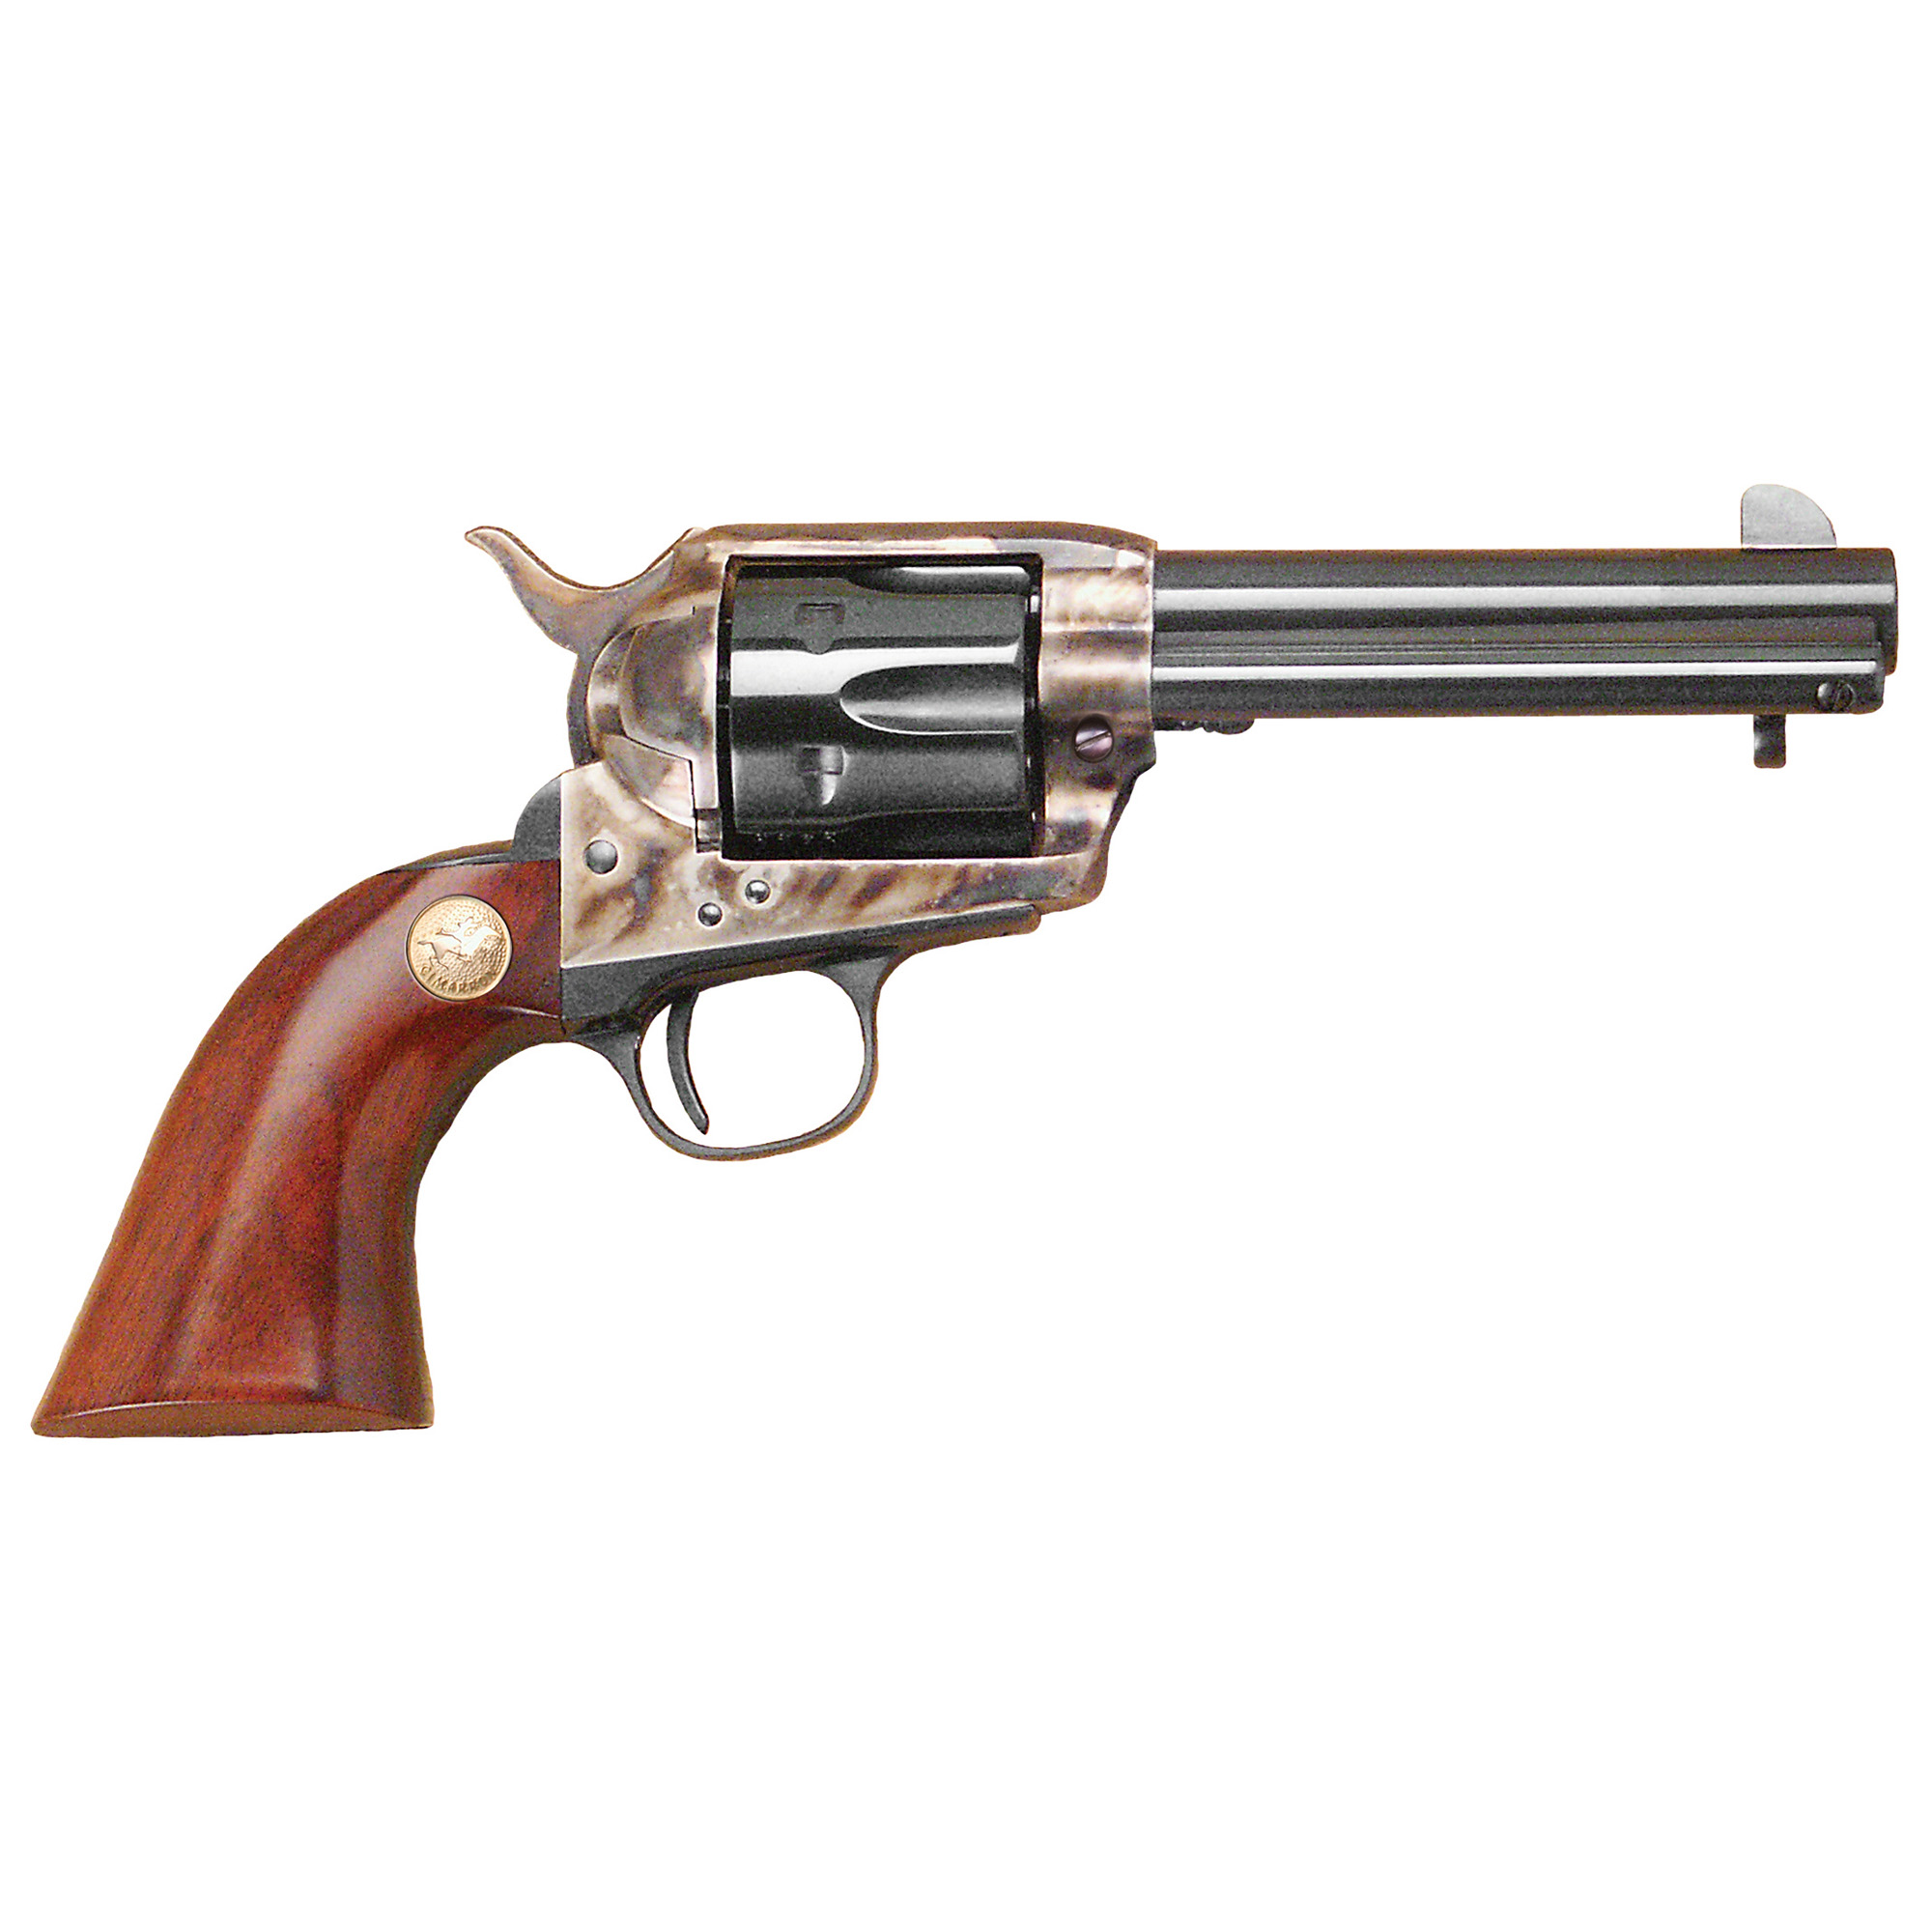 Cimarron, Model P, Single Action Army, 45LC, 4.75" Barrel, Steel, Case Hardened Finish, Wood Grips, Fixed Sights, 6 Rounds